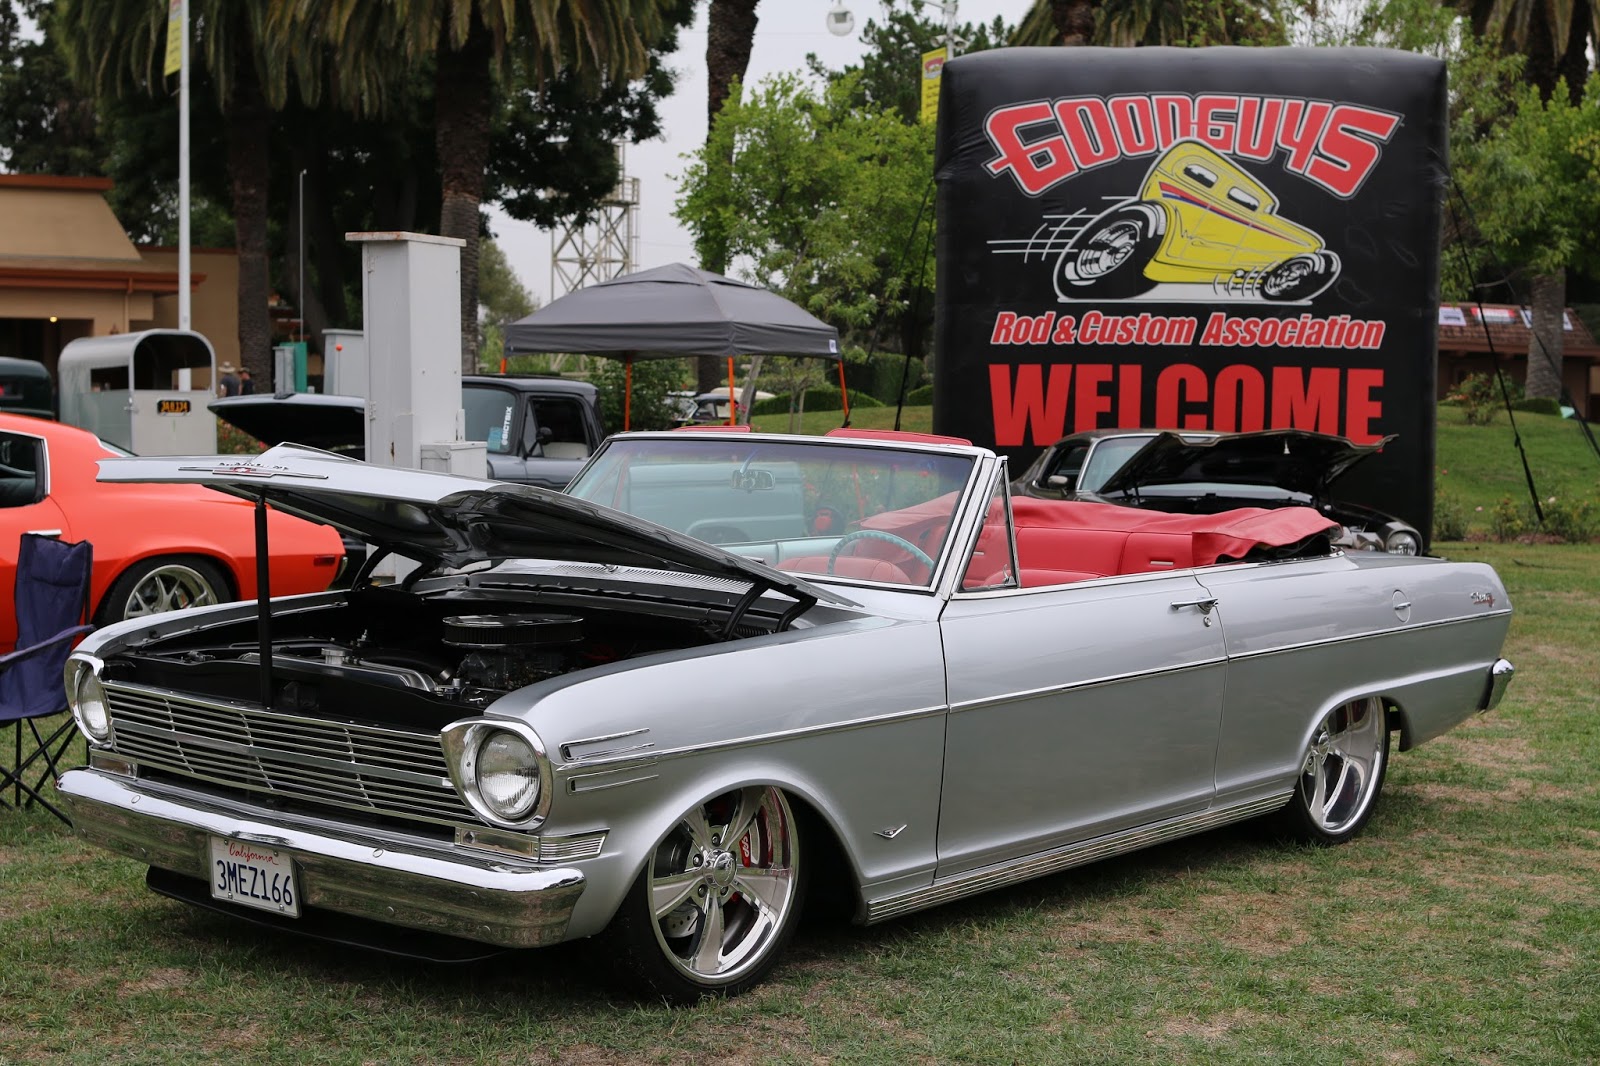 Covering Classic Cars 30th Annual Goodguys West Coast Nationals inside classic cars pleasanton